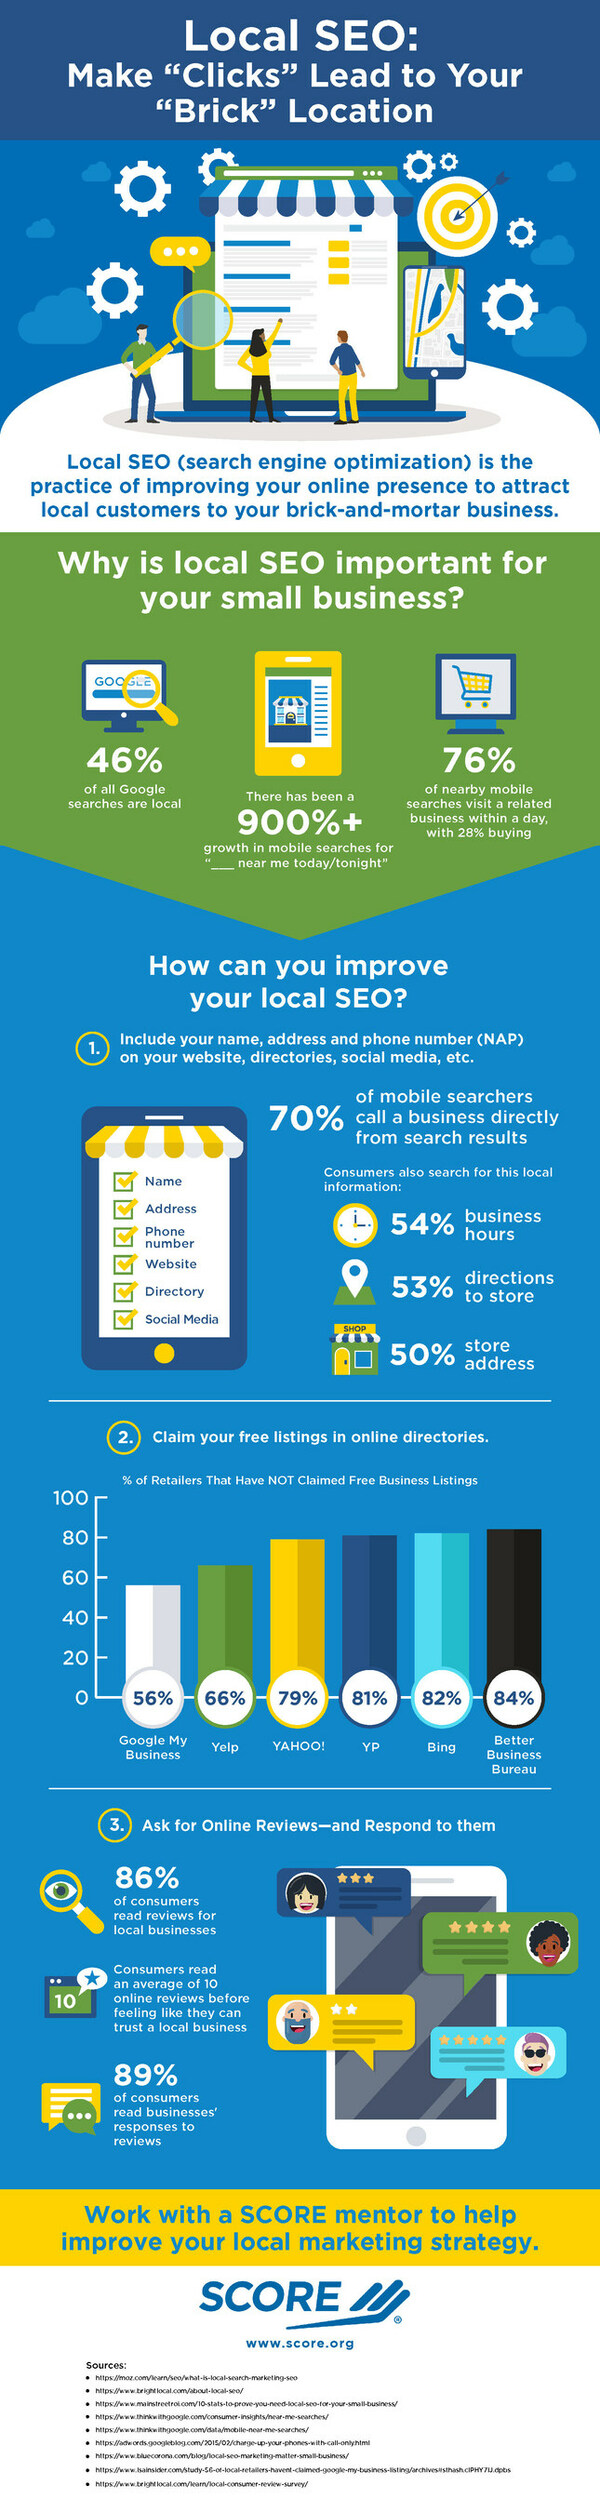 SCORE, mentors to America’s small businesses, has published an infographic highlighting how small businesses can use search engine optimization (SEO) to capitalize on the rise in local search to increase their customer traffic. Data gathered by SCORE shows that 46% of all Google searches are local – and indicates a more than 900% growth in mobile searches for local businesses from 2016 to 2018.